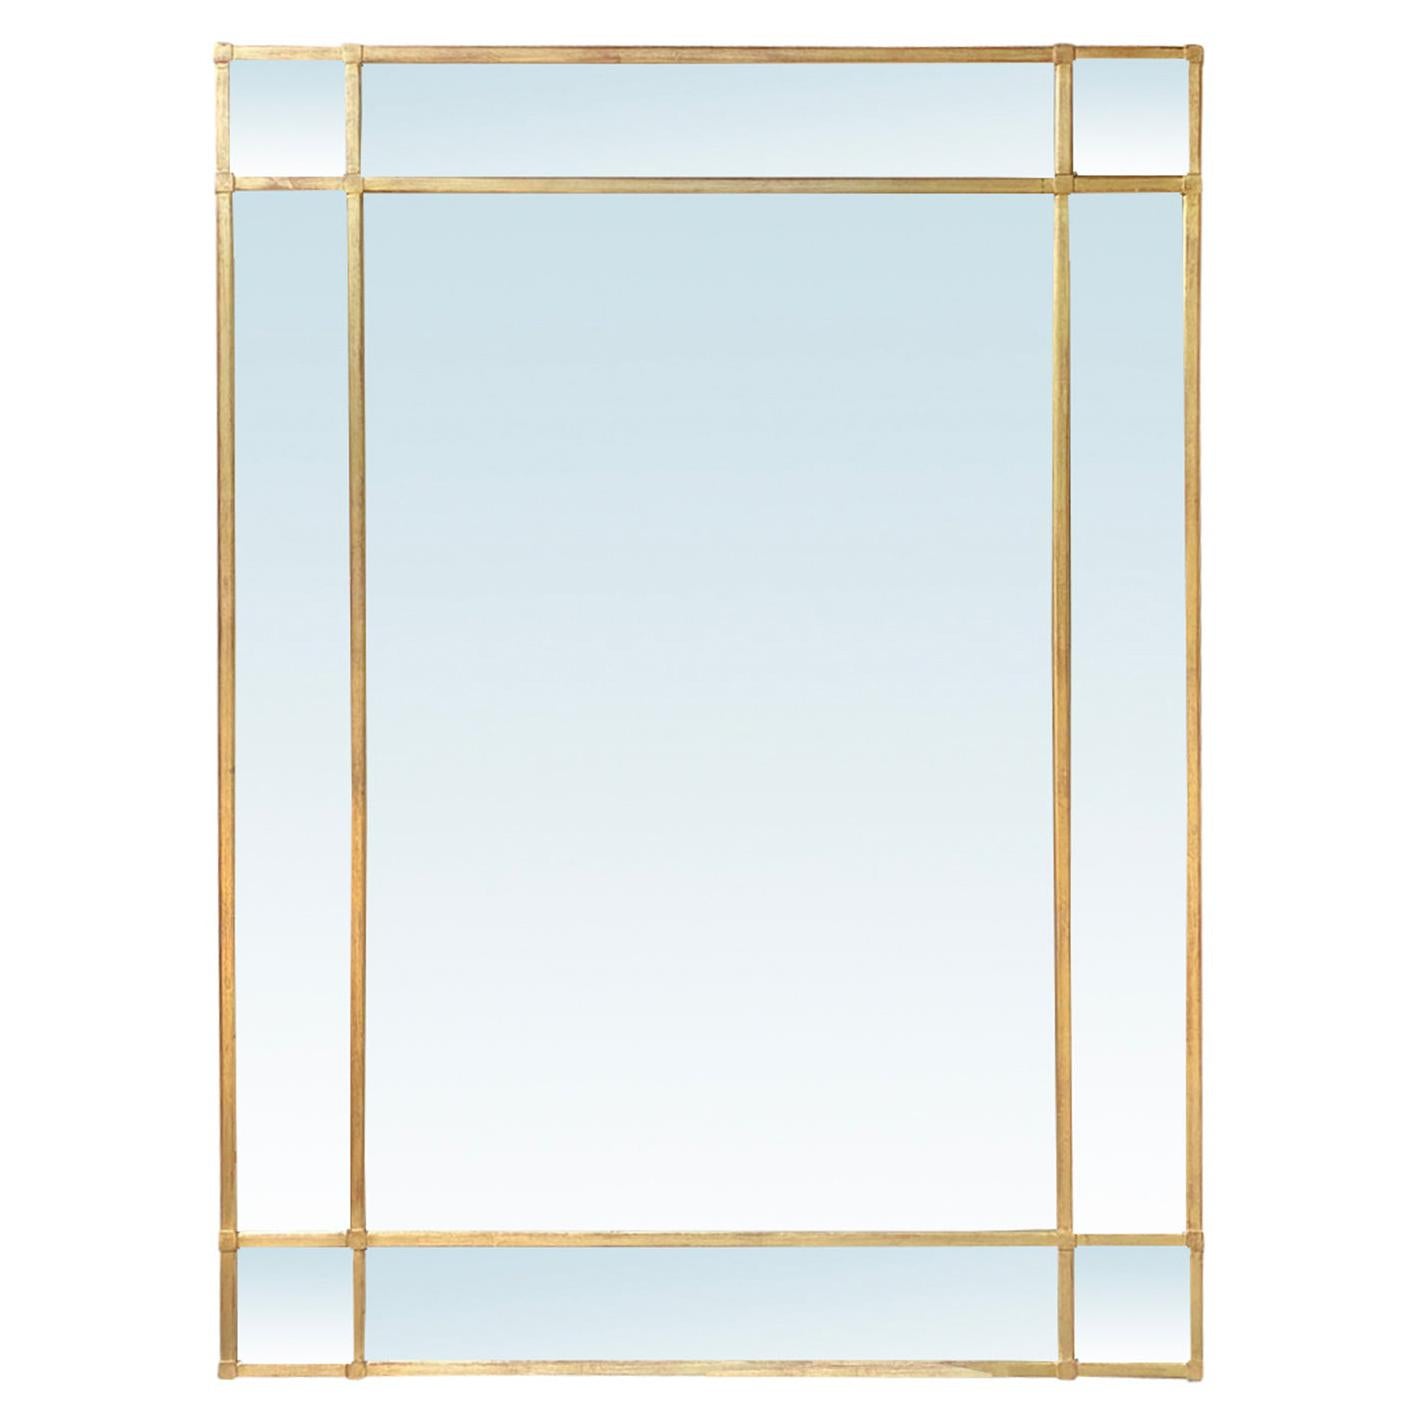 Circa 1950s Giltwood Wall Mirror For Sale